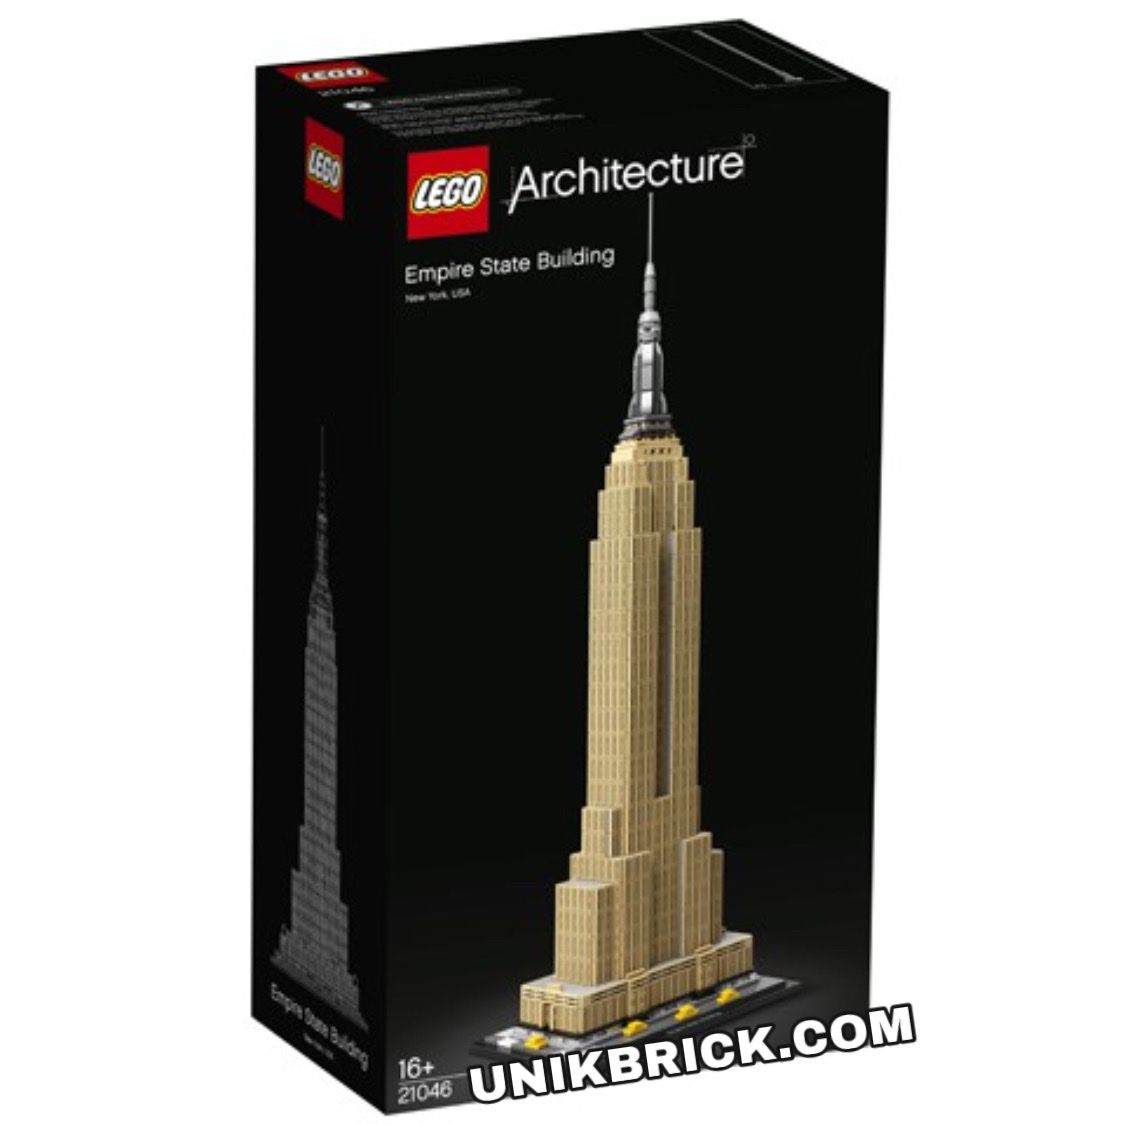 [HÀNG ĐẶT/ORDER] LEGO Architecture 21046 Empire State Building